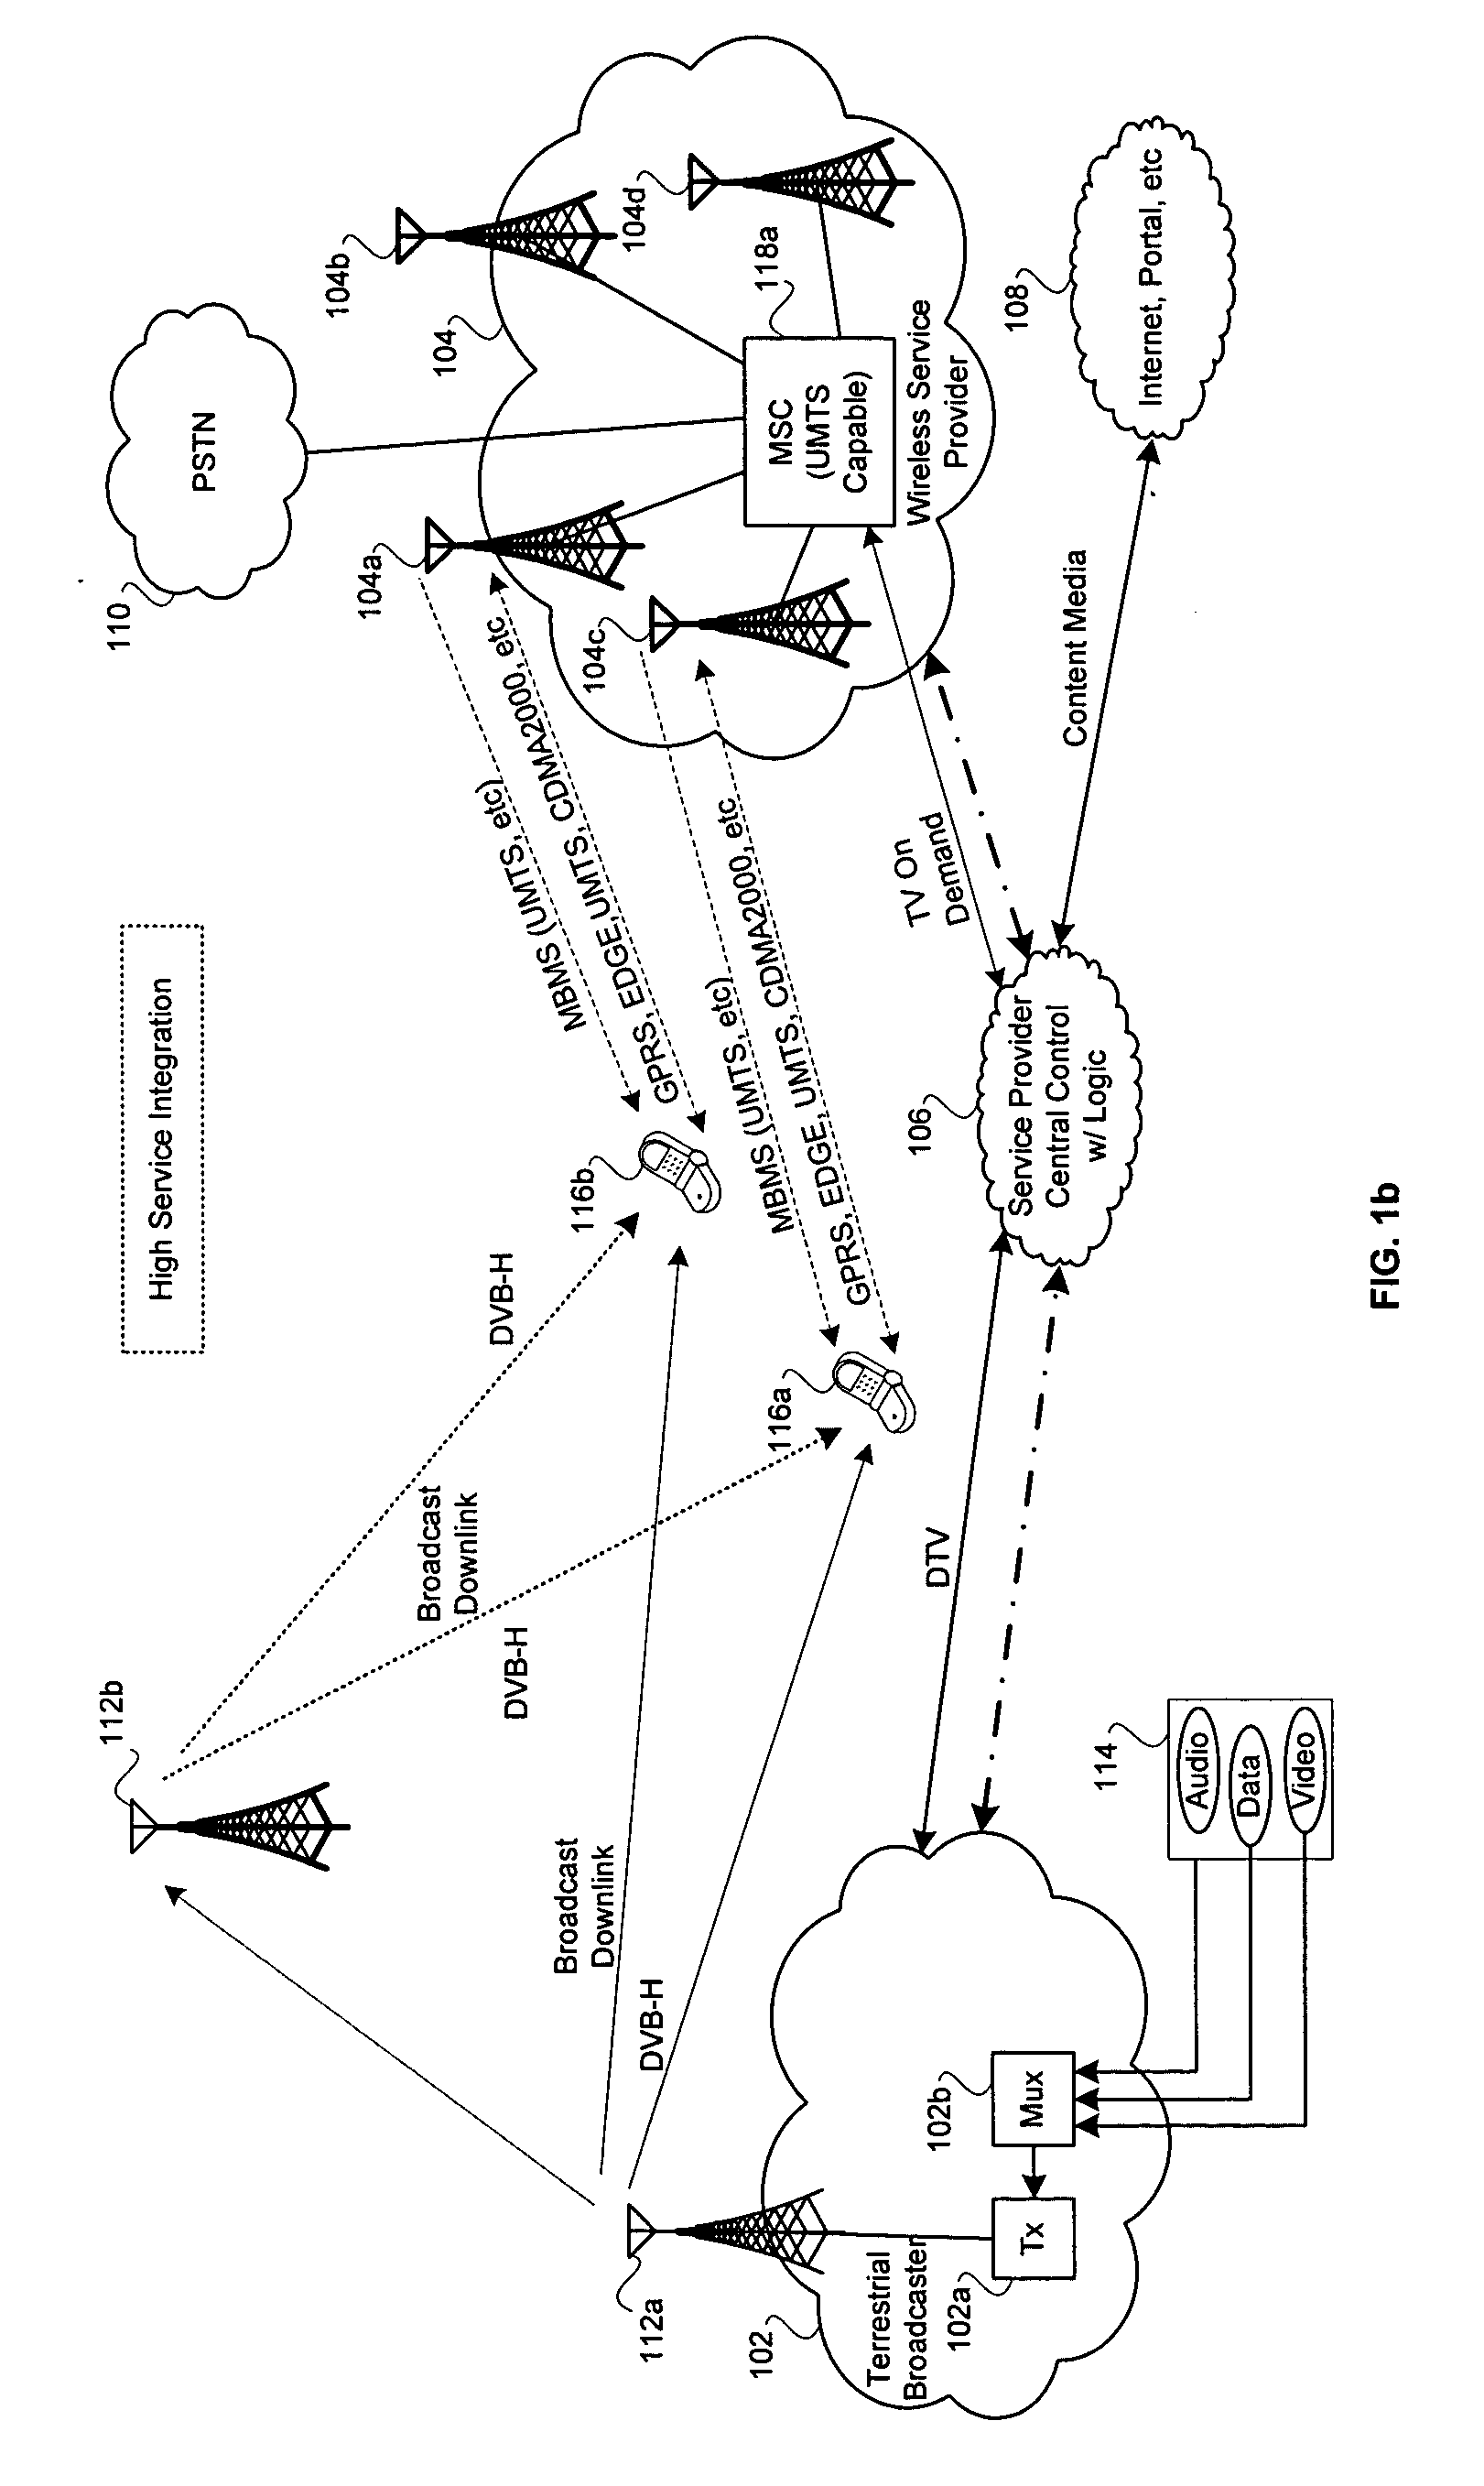 Method and system for providing broadcast services through a cellular and/or wireless network to a plurality of mobile devices via service provider integration